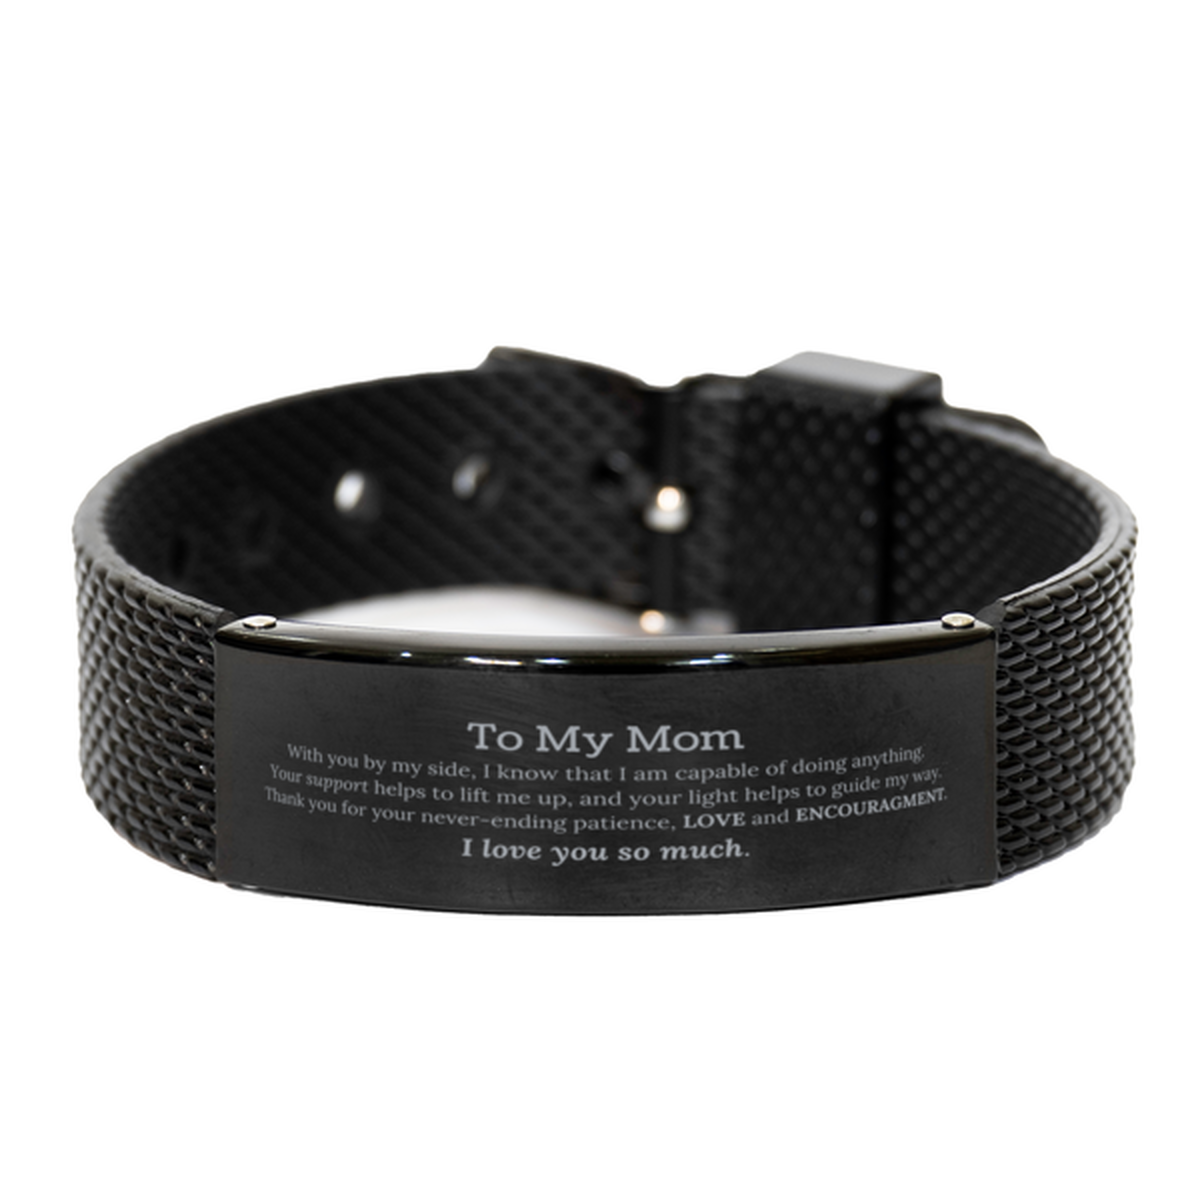 Appreciation Mom Black Shark Mesh Bracelet Gifts, To My Mom Birthday Christmas Wedding Keepsake Gifts for Mom With you by my side, I know that I am capable of doing anything. I love you so much